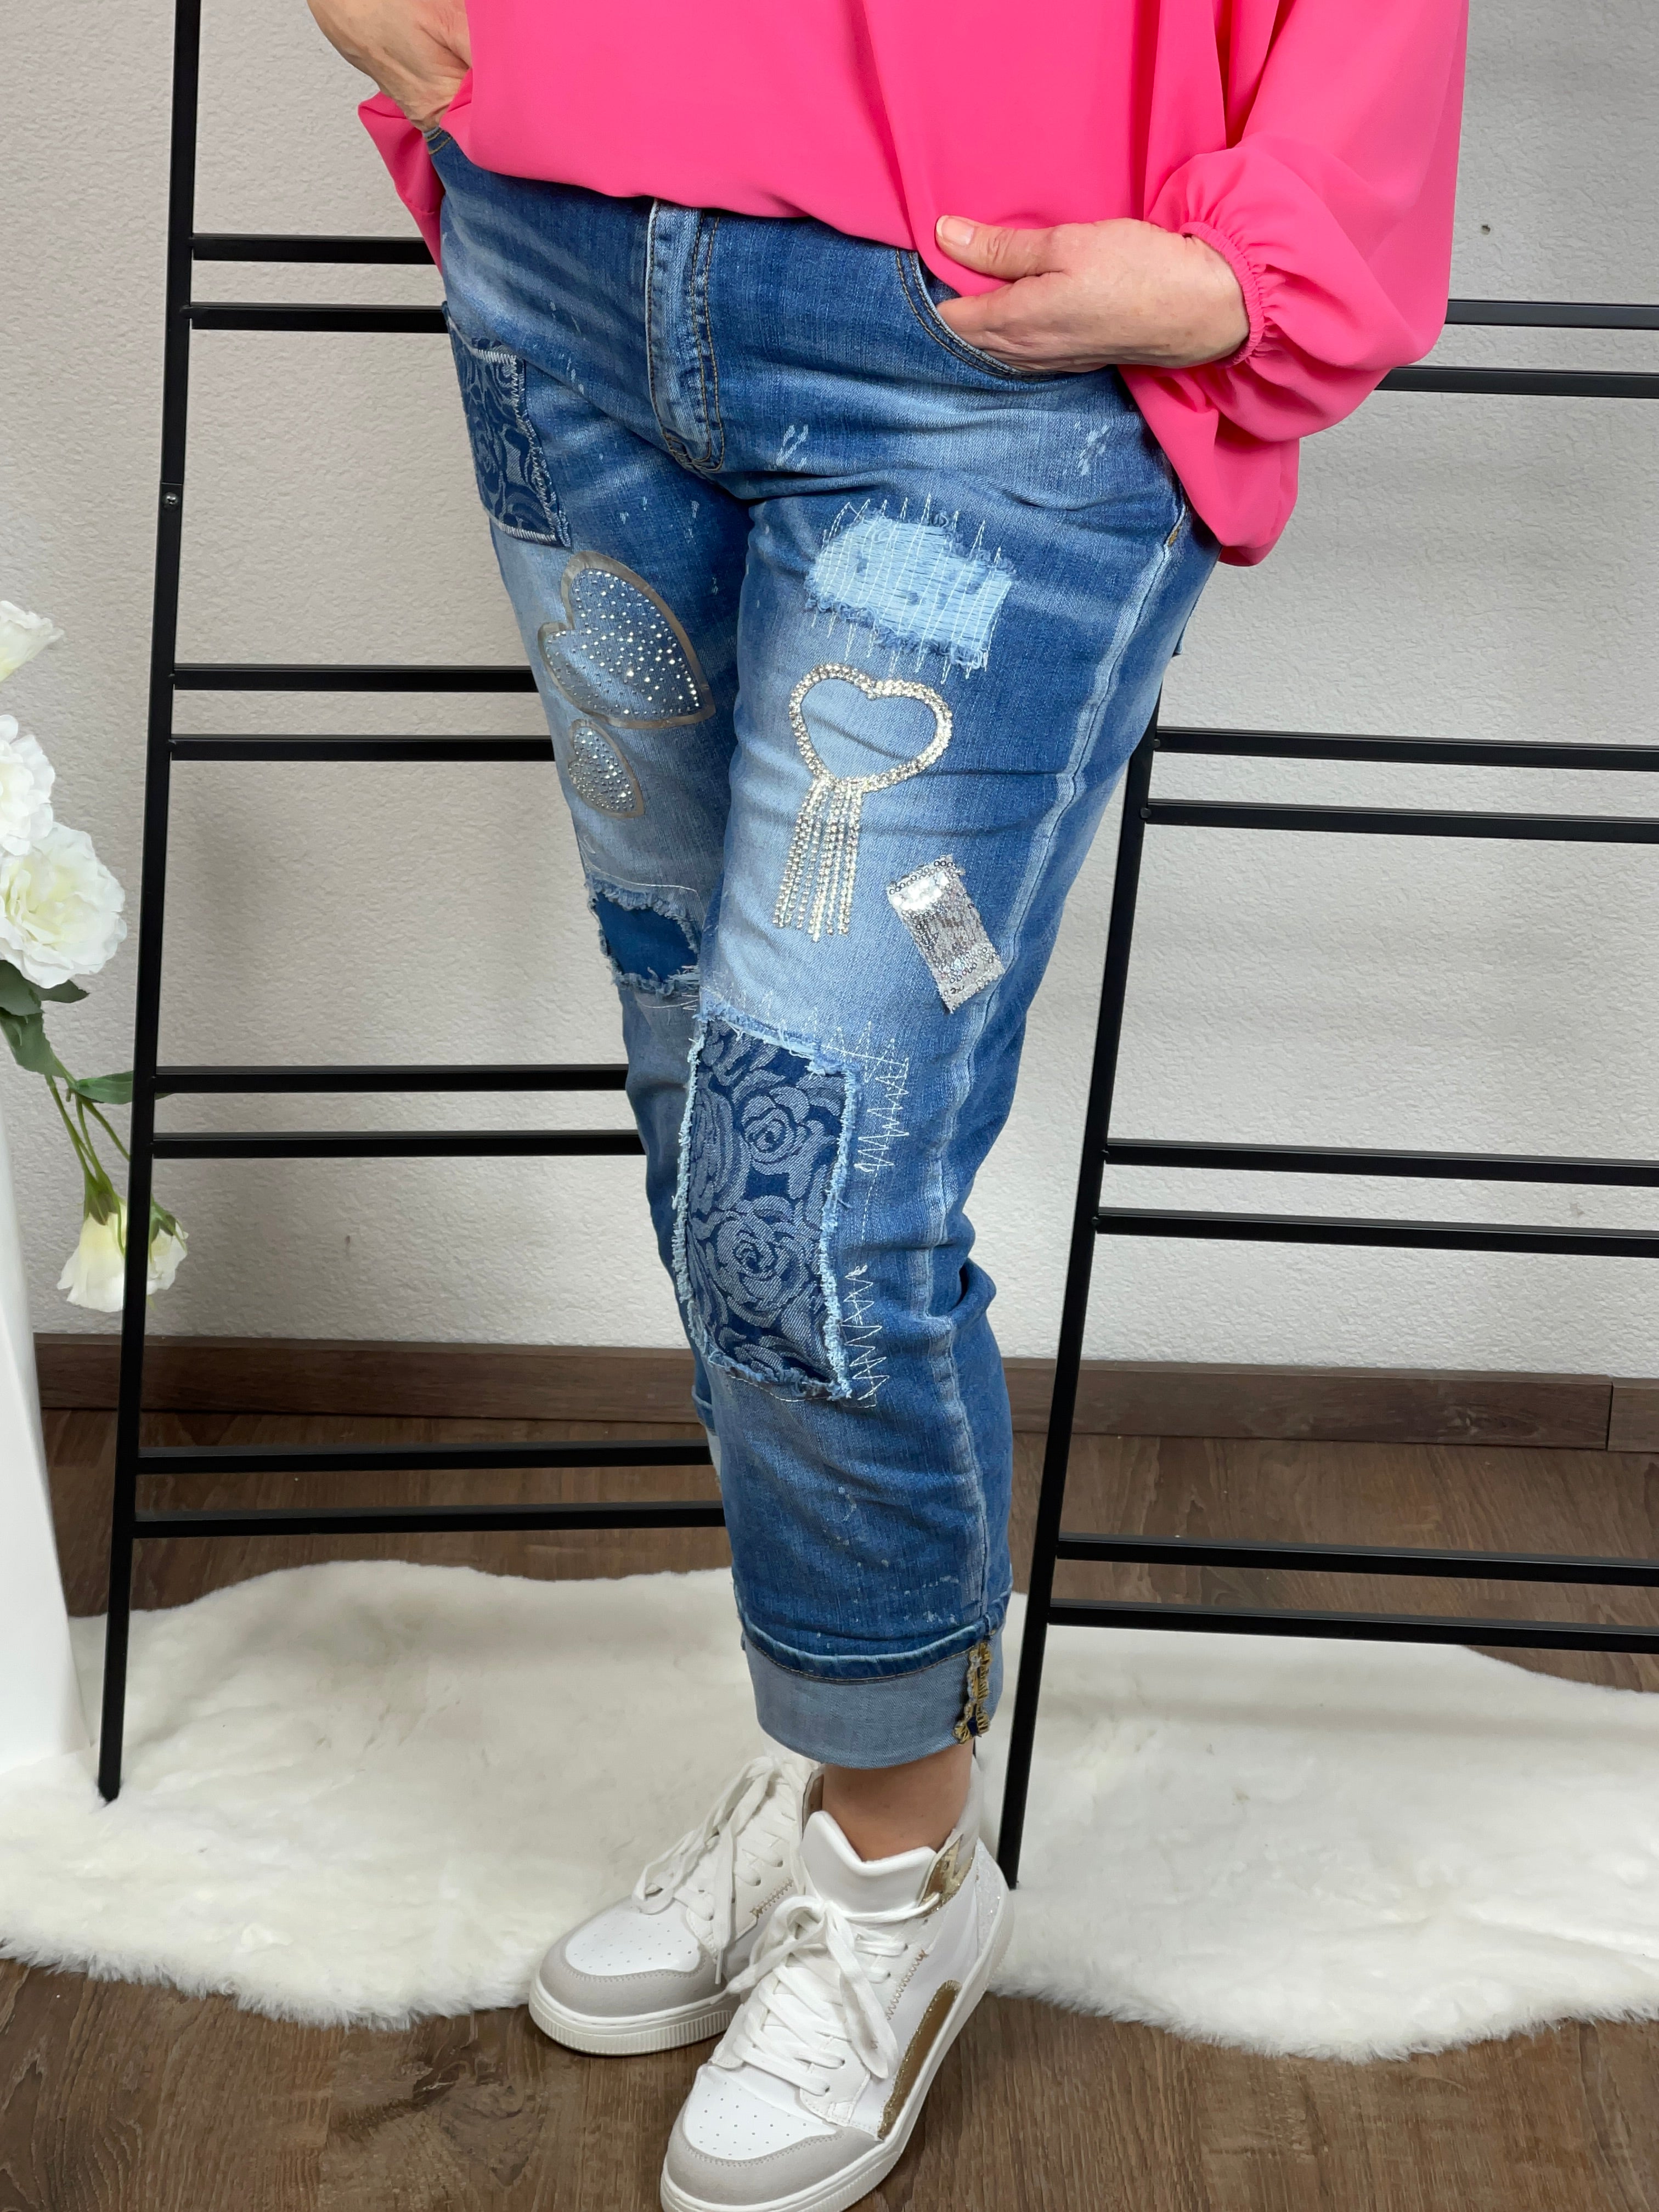 Jeans „Heart with Roses“ Gr. 36 - 42